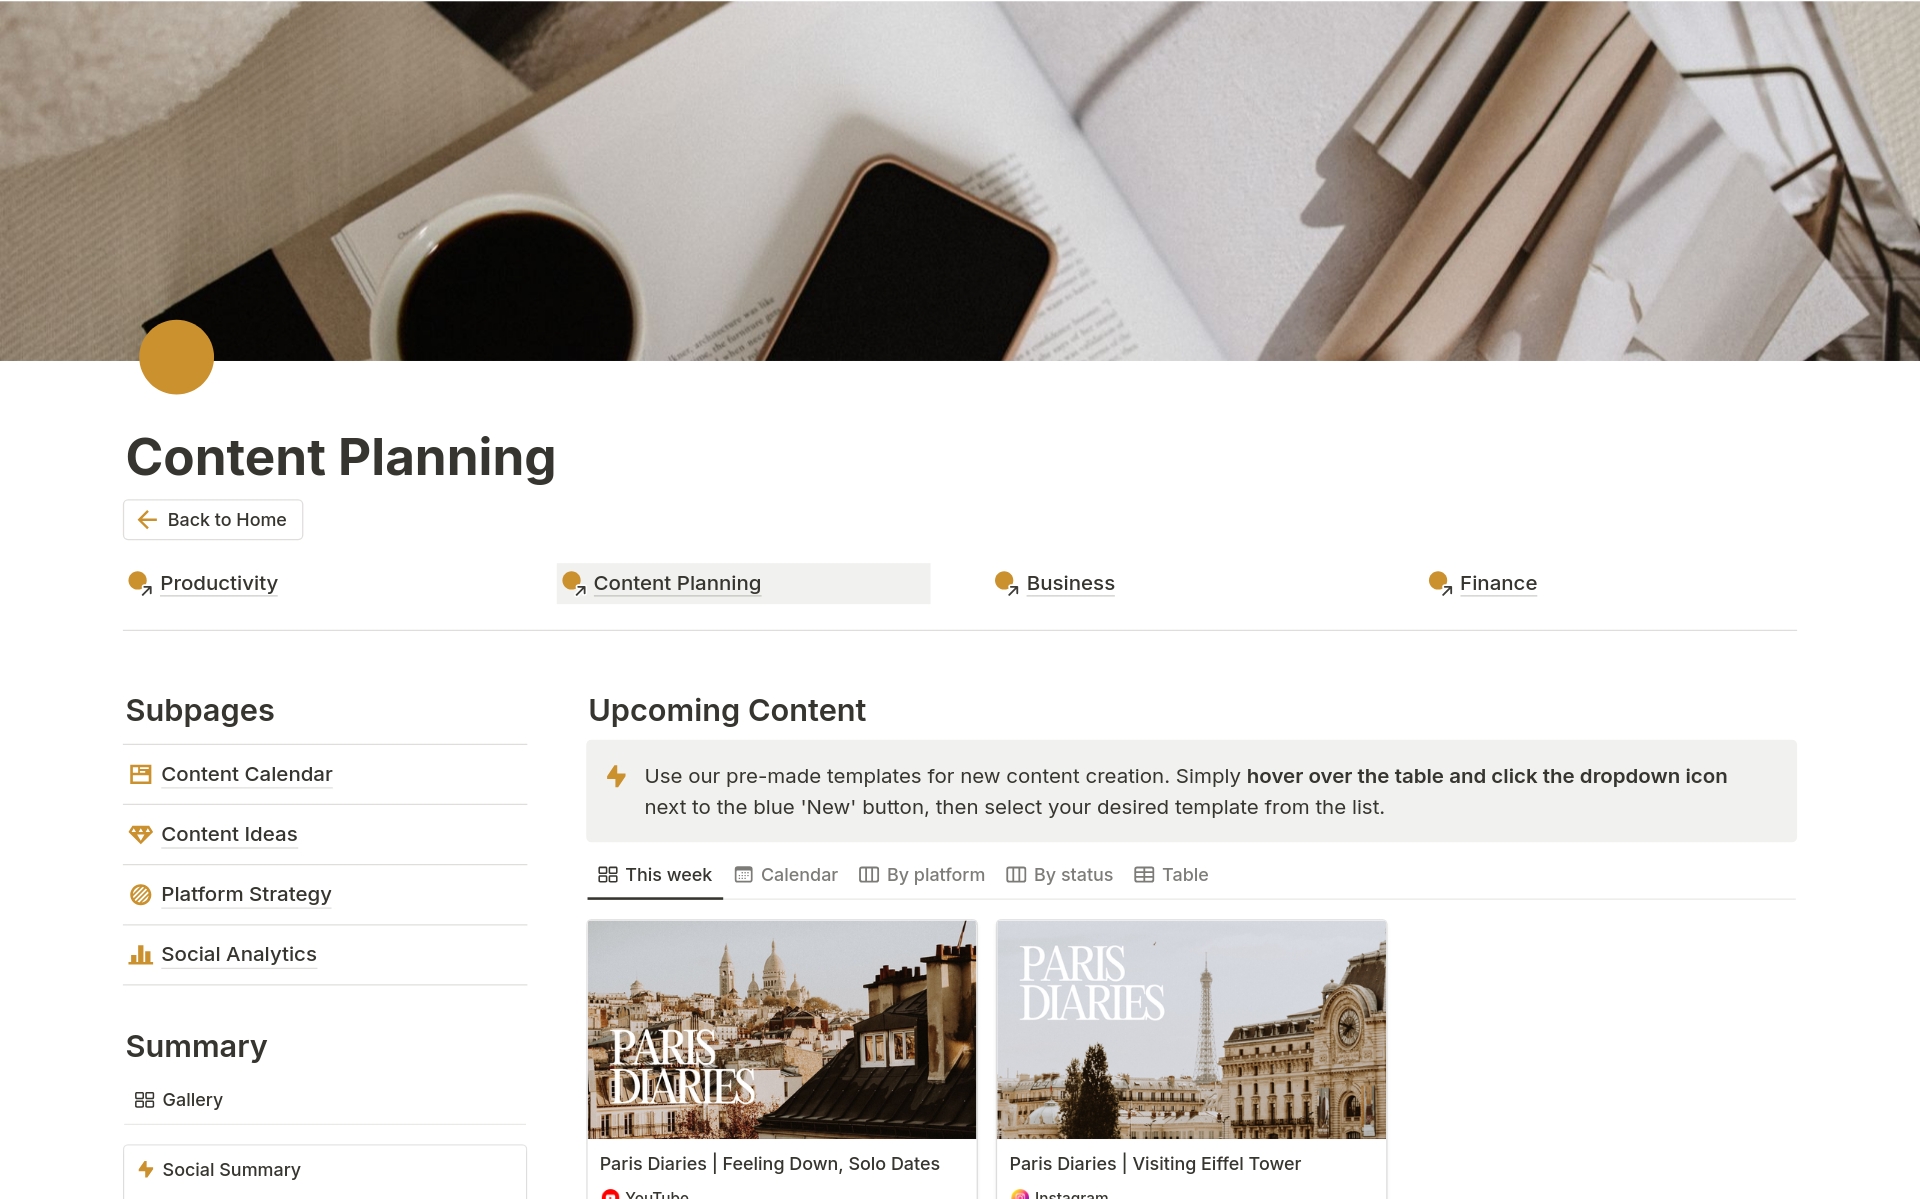 An all-in-one Social Media Template for planning, organizing, and tracking your content effortlessly.